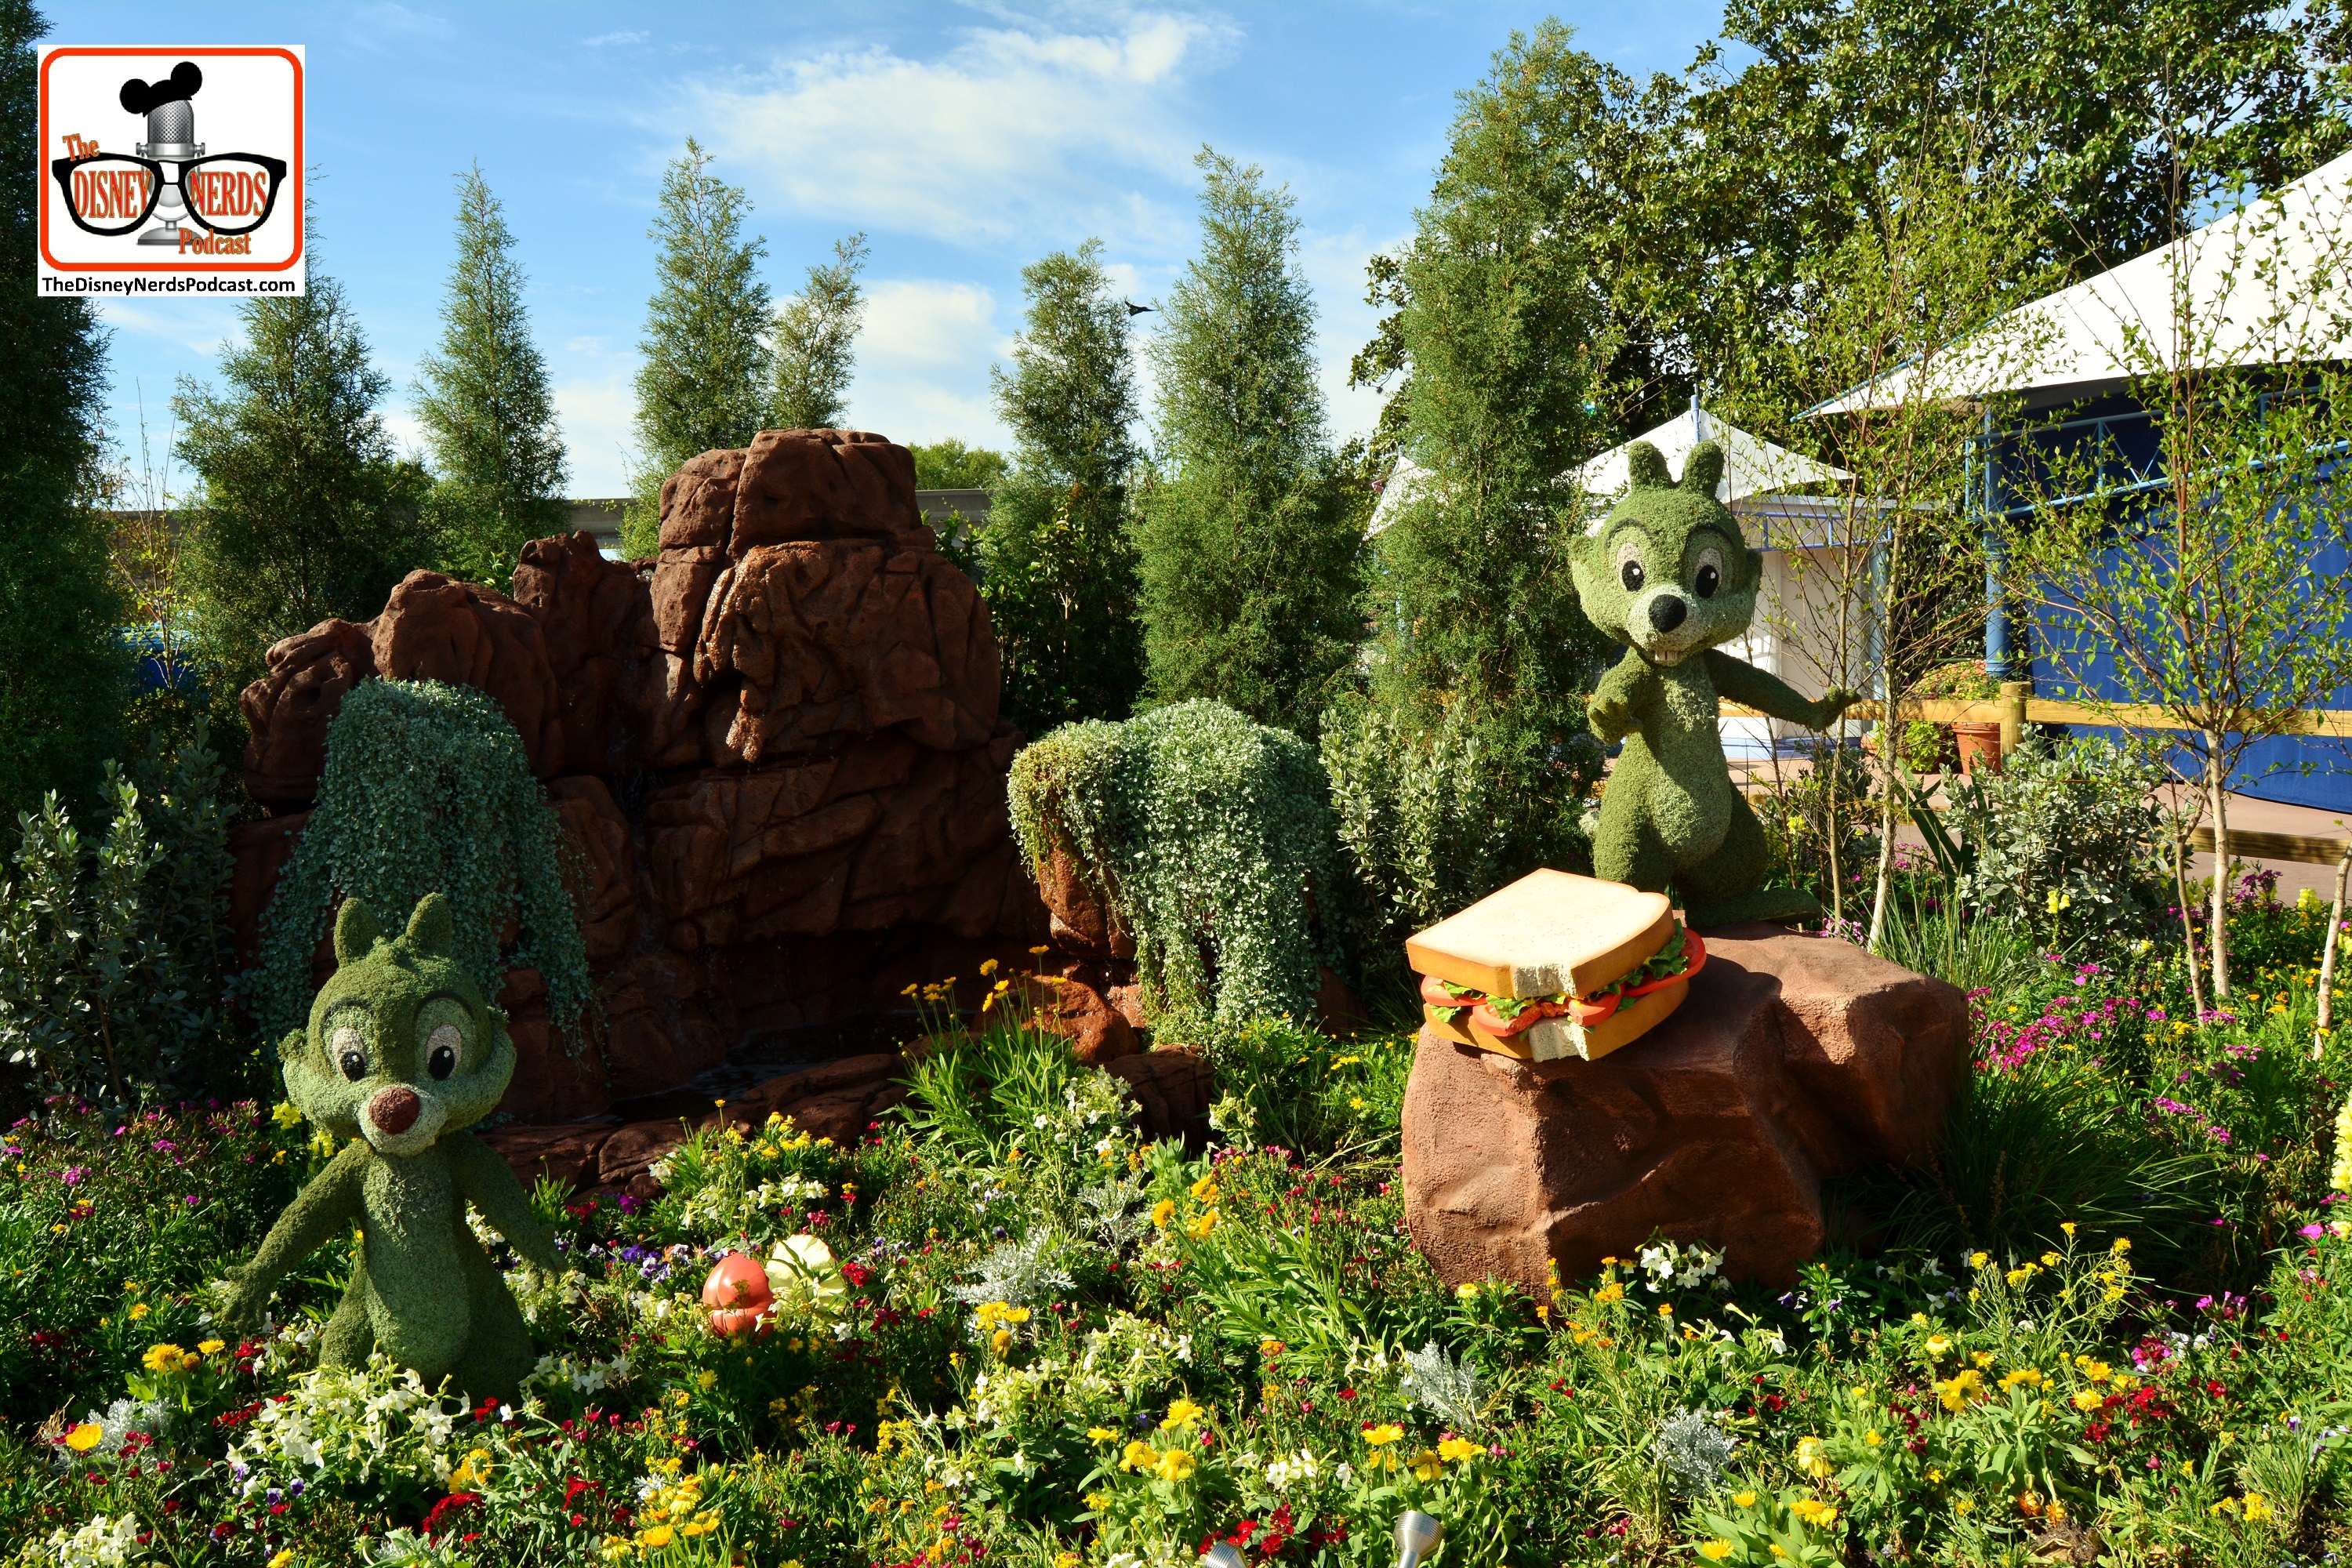 DNP April 2016 Photo Report: Epcot Flower and Garden Festival. Chip and Dale with Mickey's Lunch